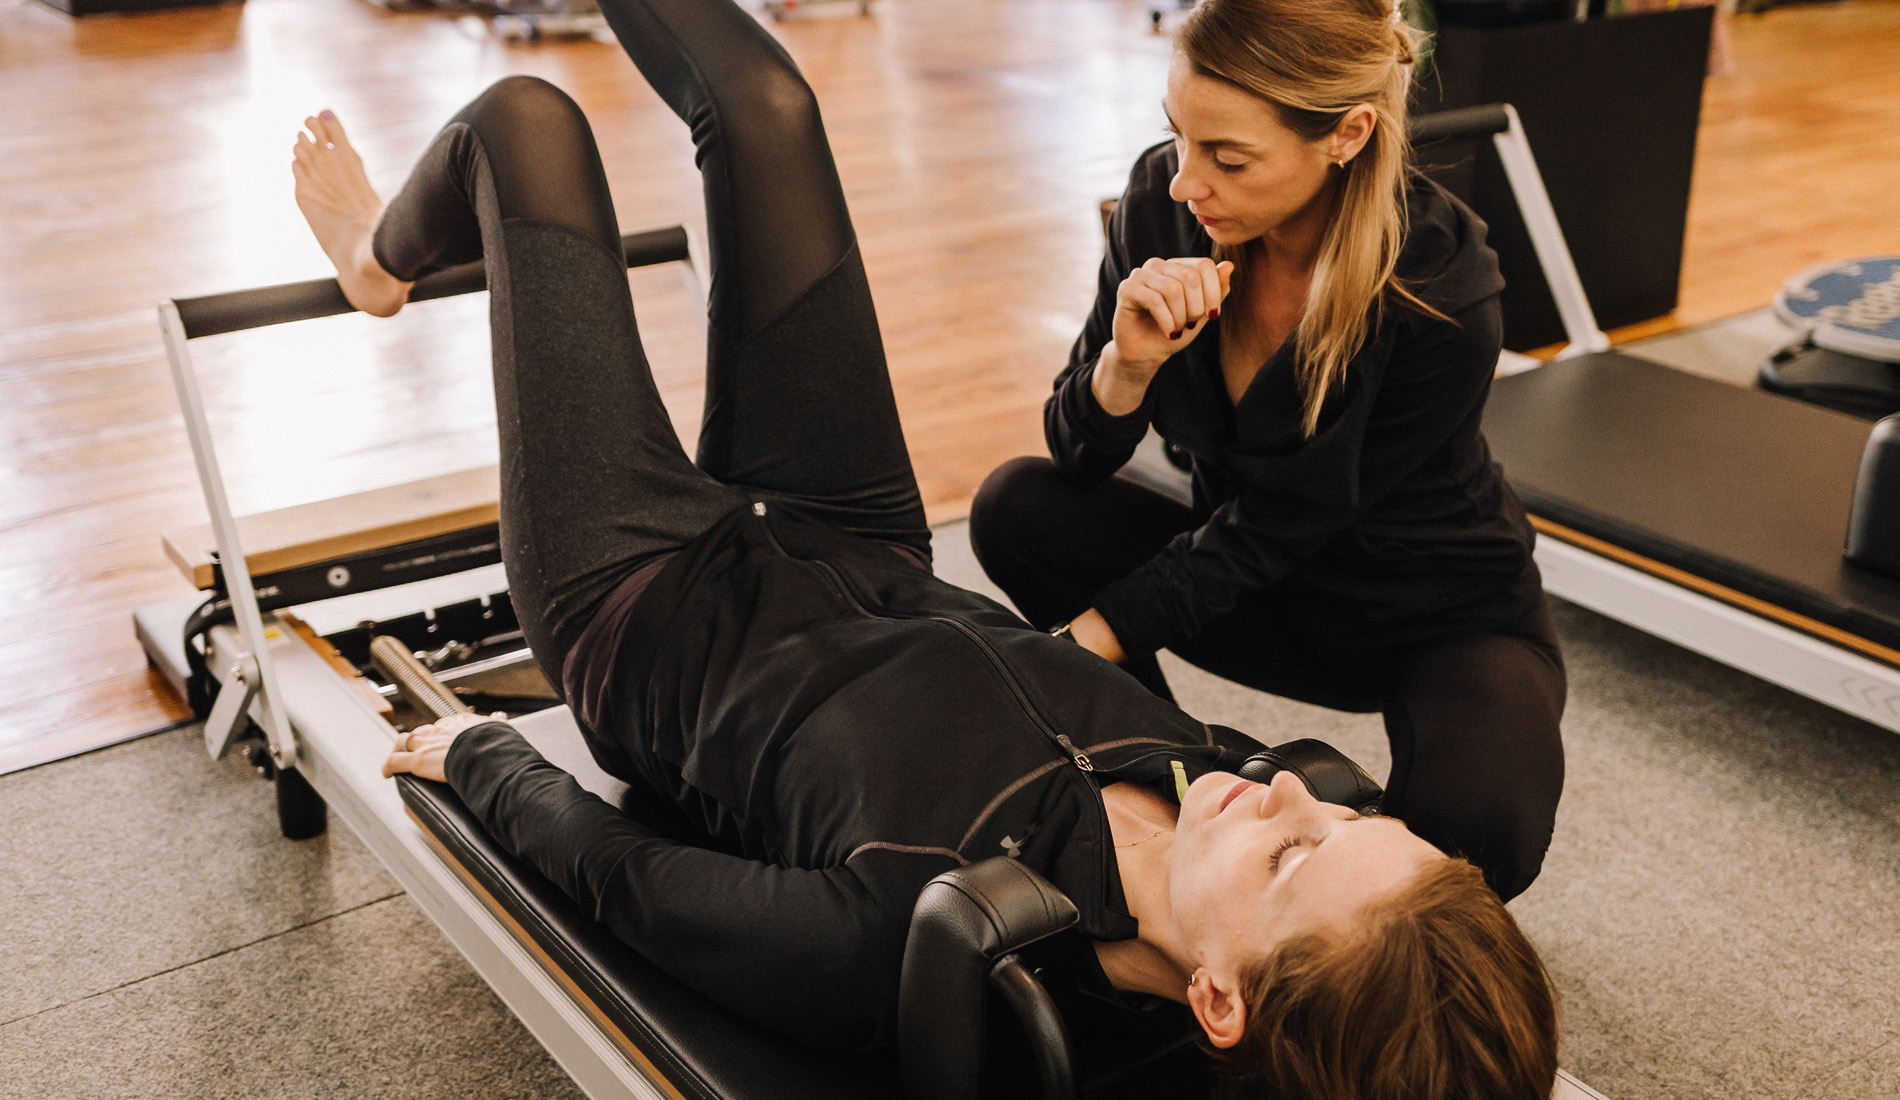 A Sanctuary Body pilates instructor guides her client's exercise